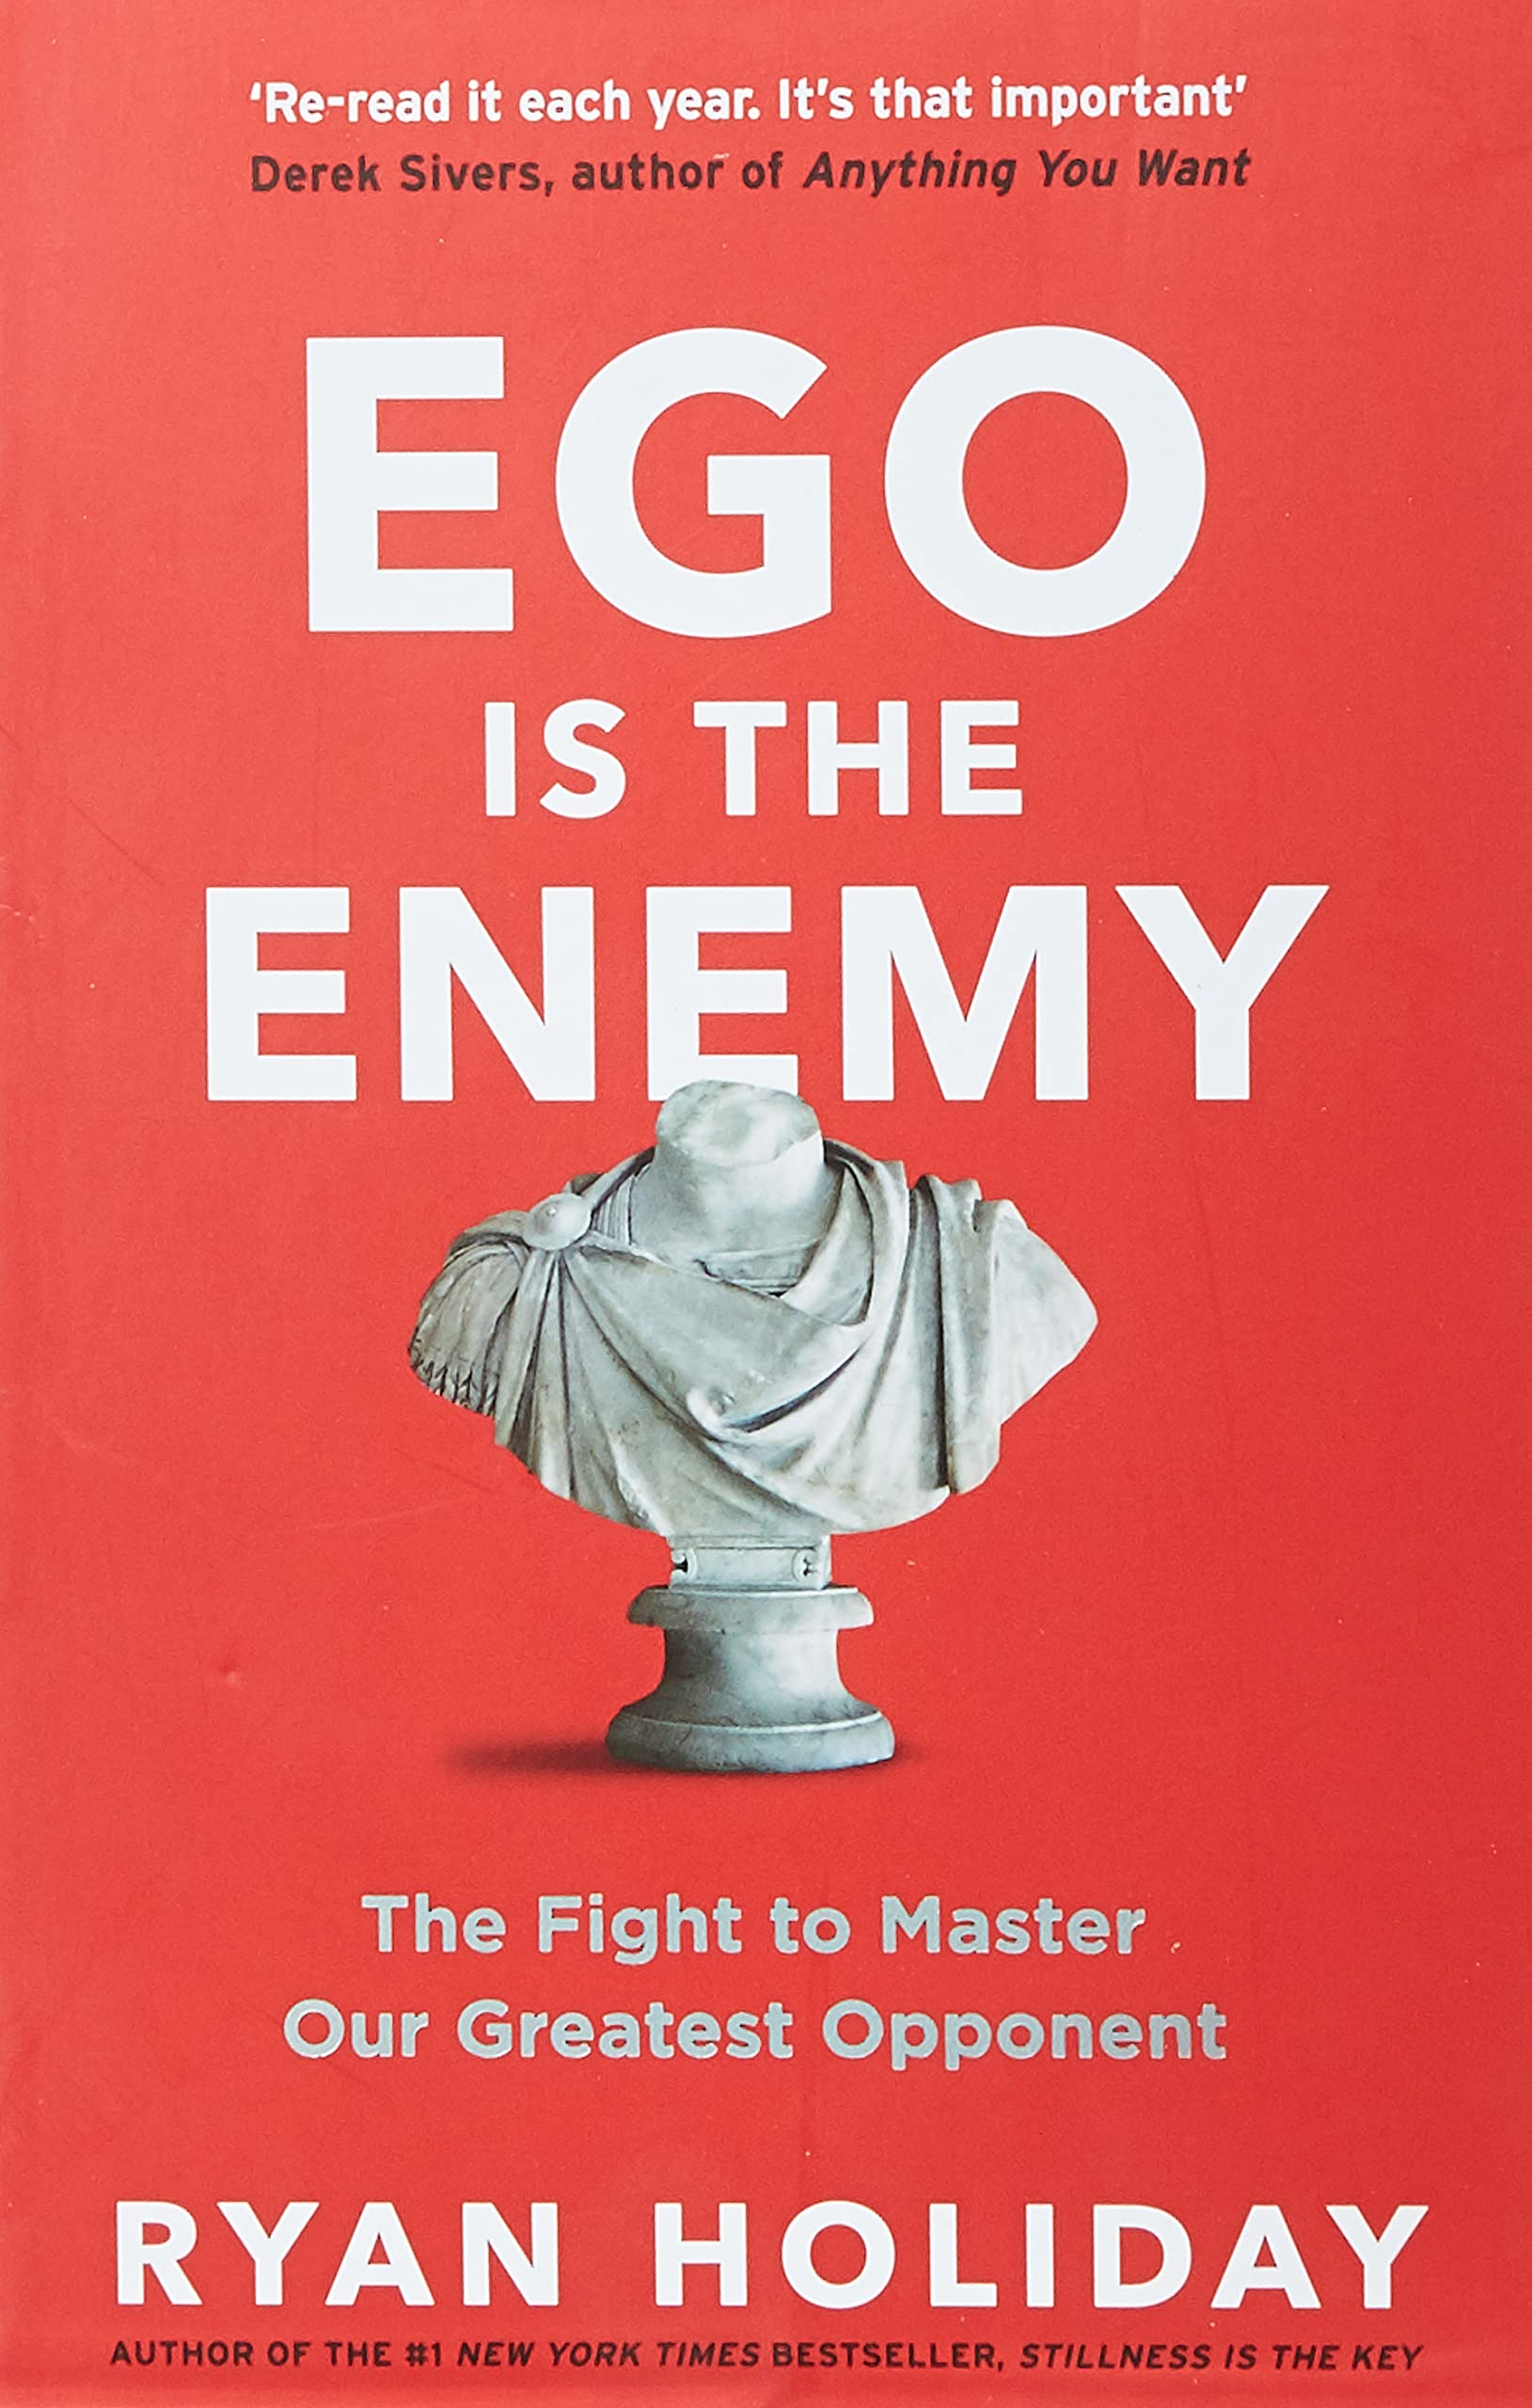 ego-is-the-enemy